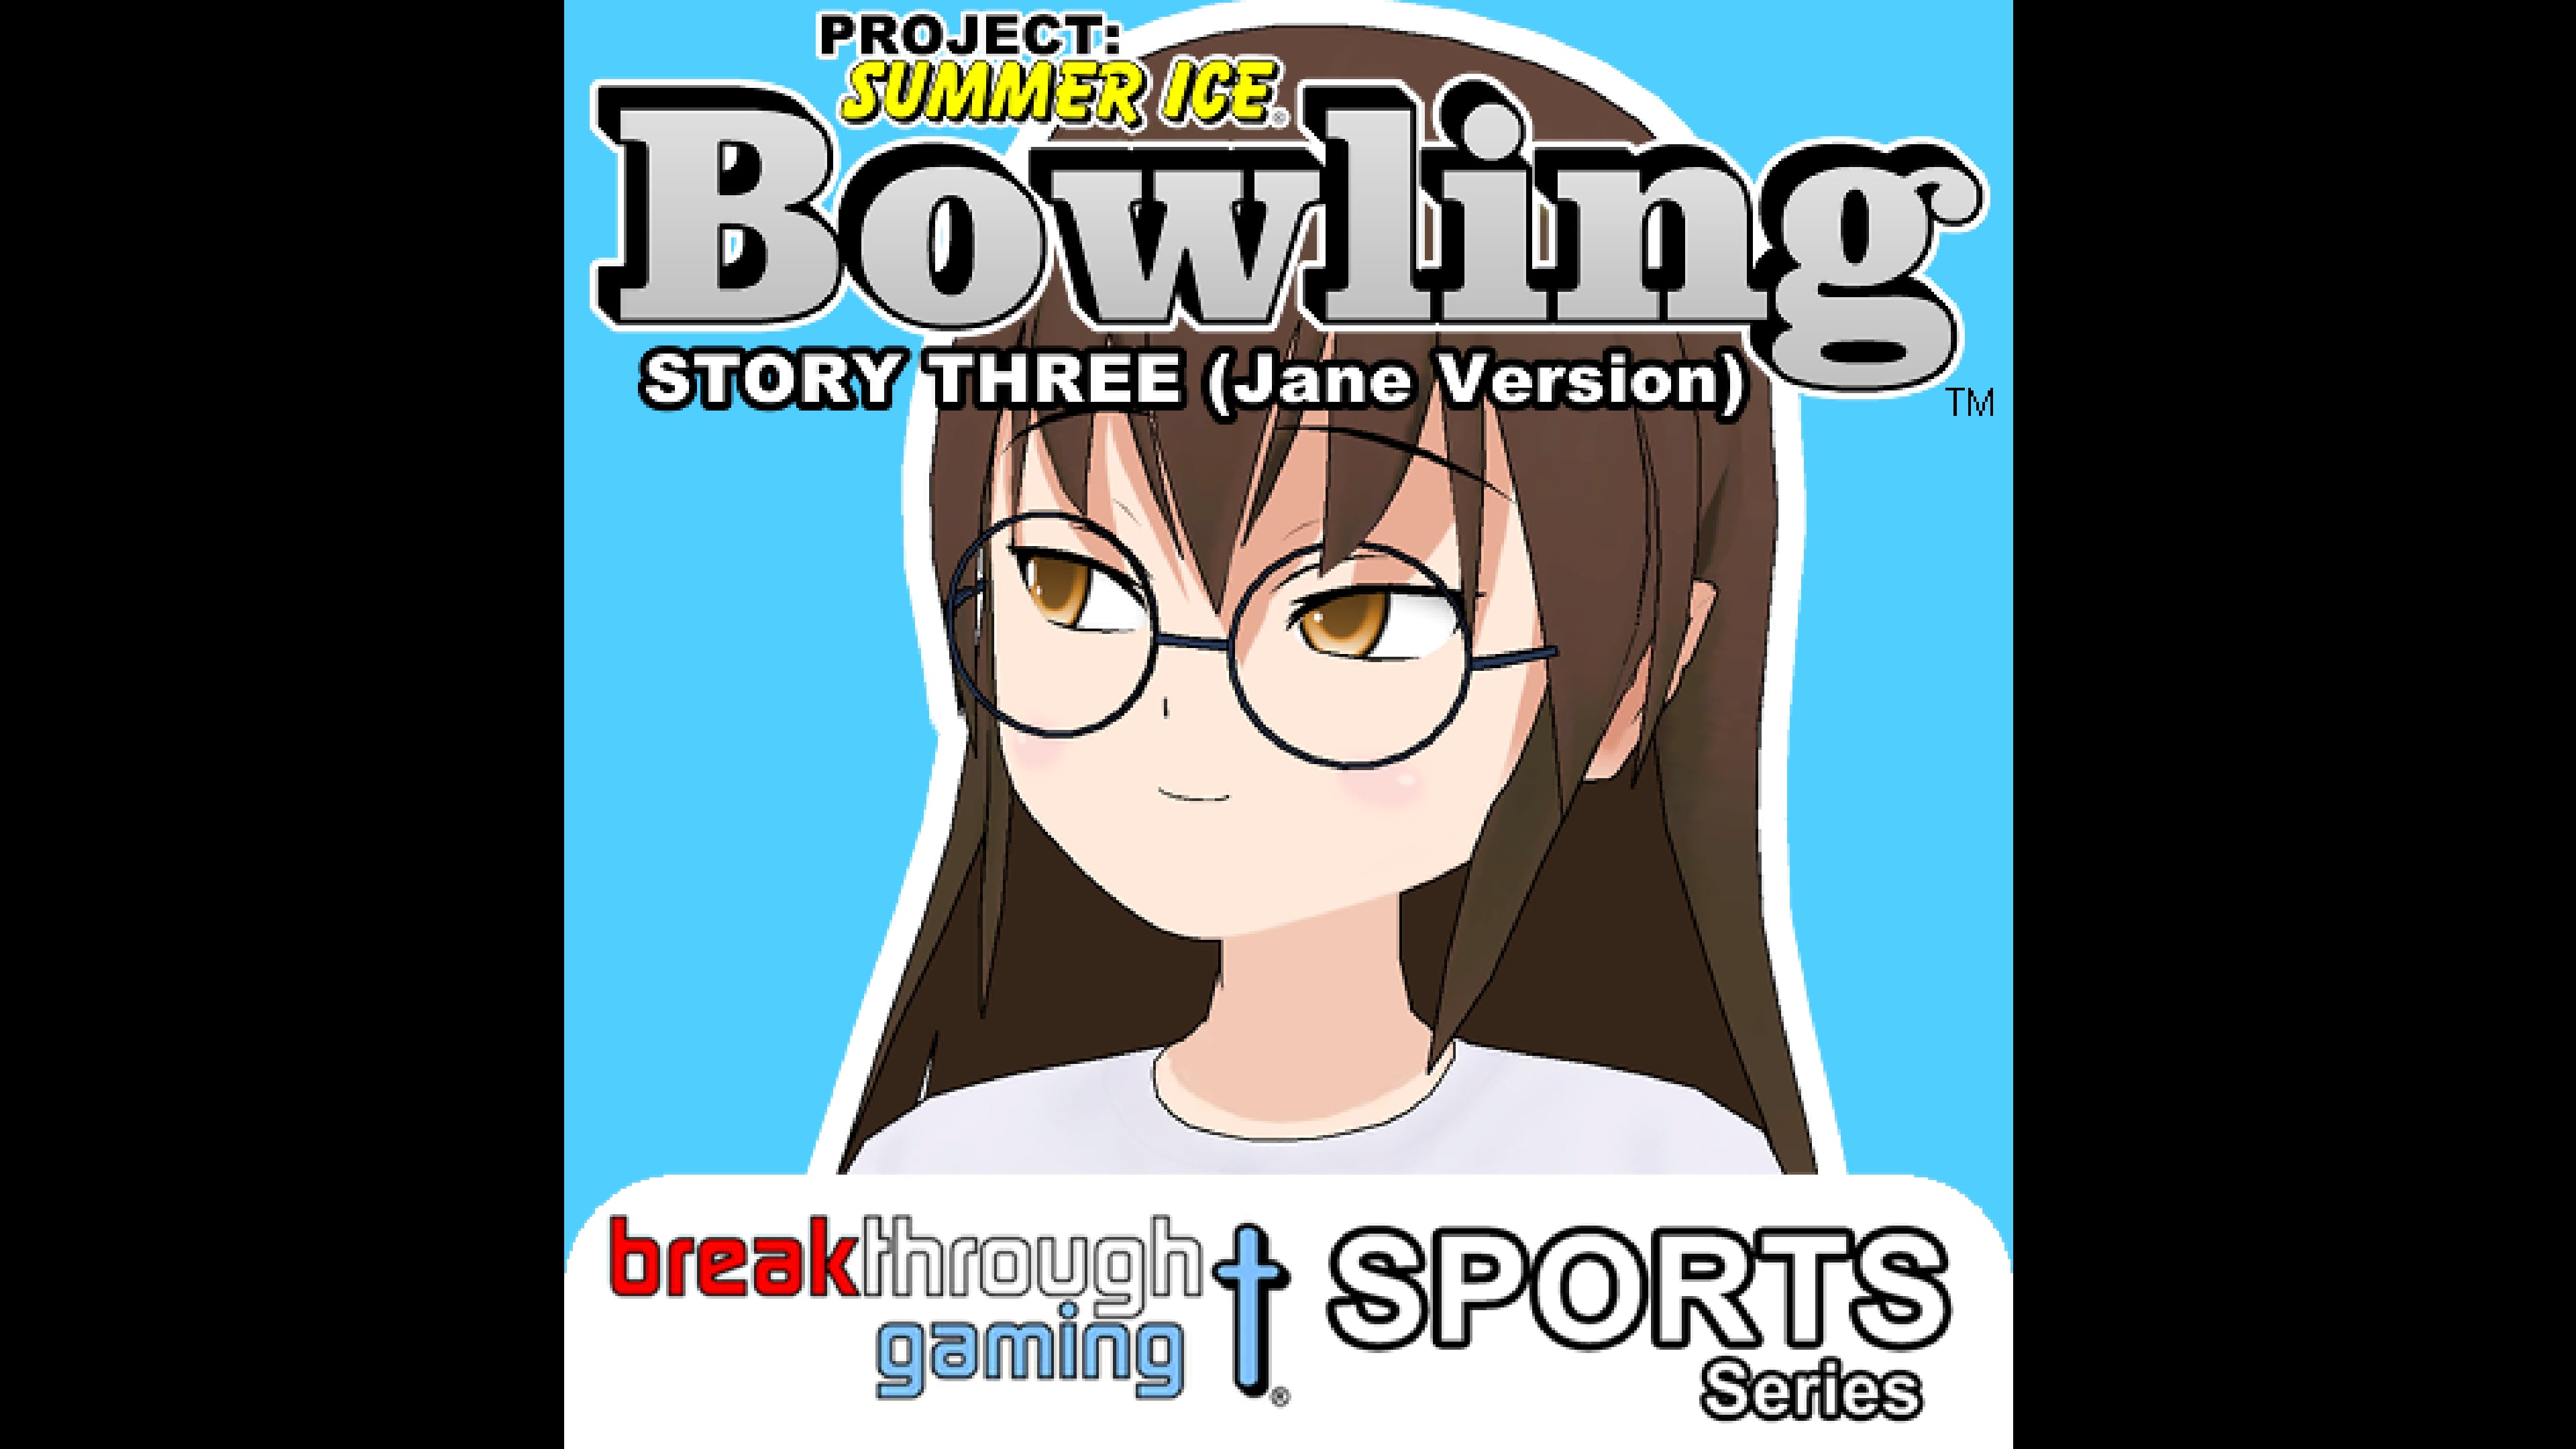 Bowling (Story Three) (Jane Version) - Project: Summer Ice